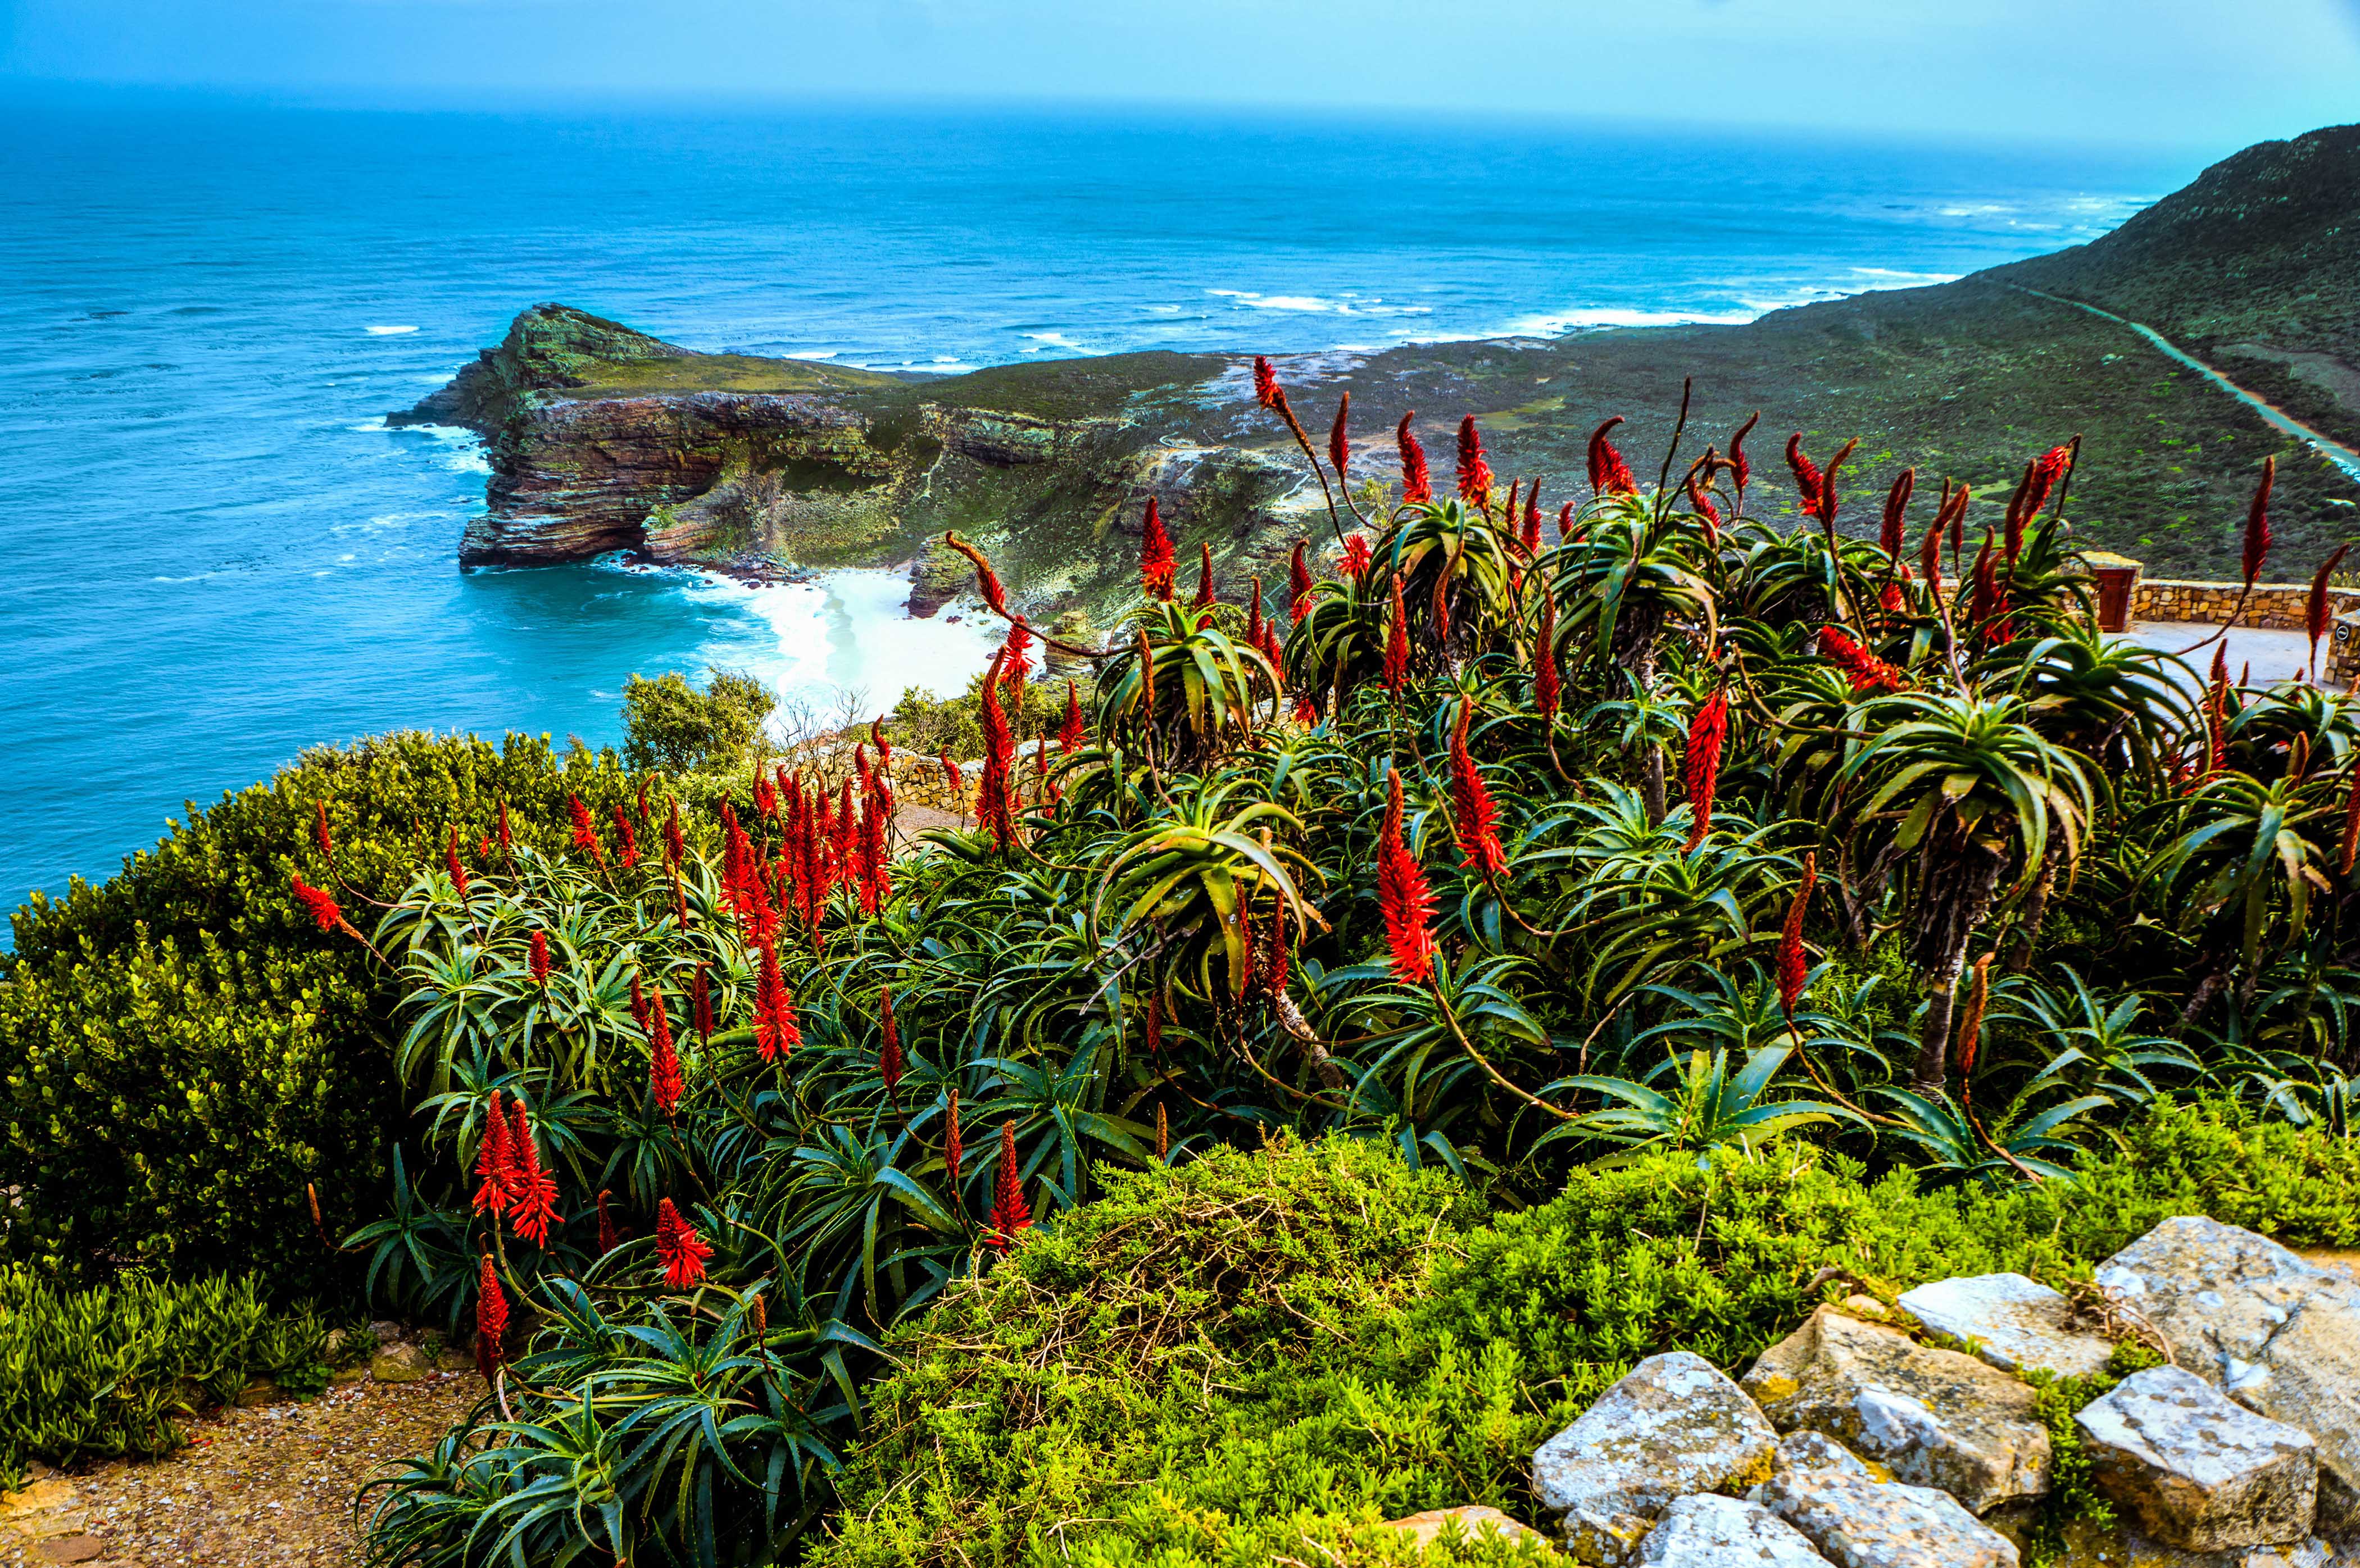 Scenic landscape view from Cape of Good Hope, South Africa.